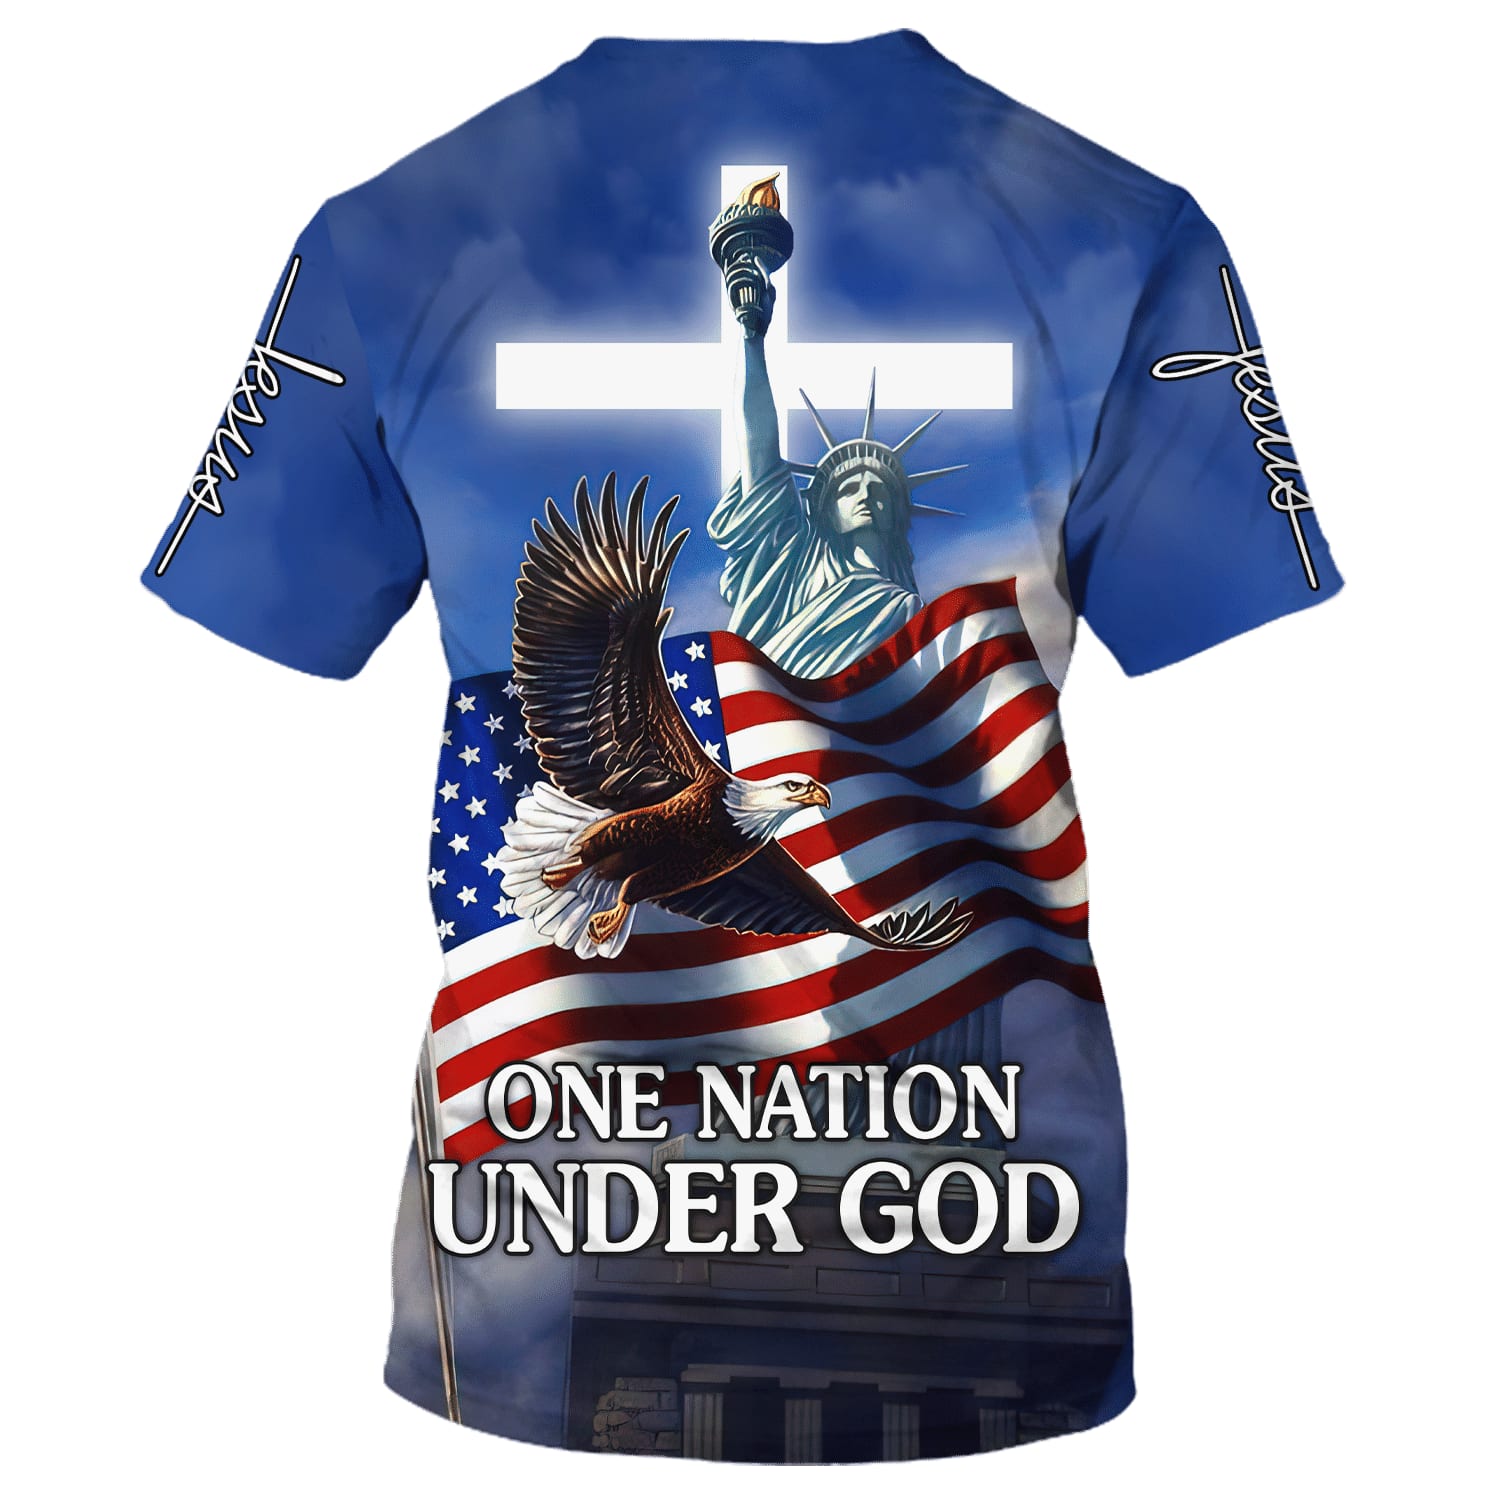 One Nation Under God Shirts - July 4th Statue Of Liberty 3d Shirts - Christian T Shirts For Men And Women